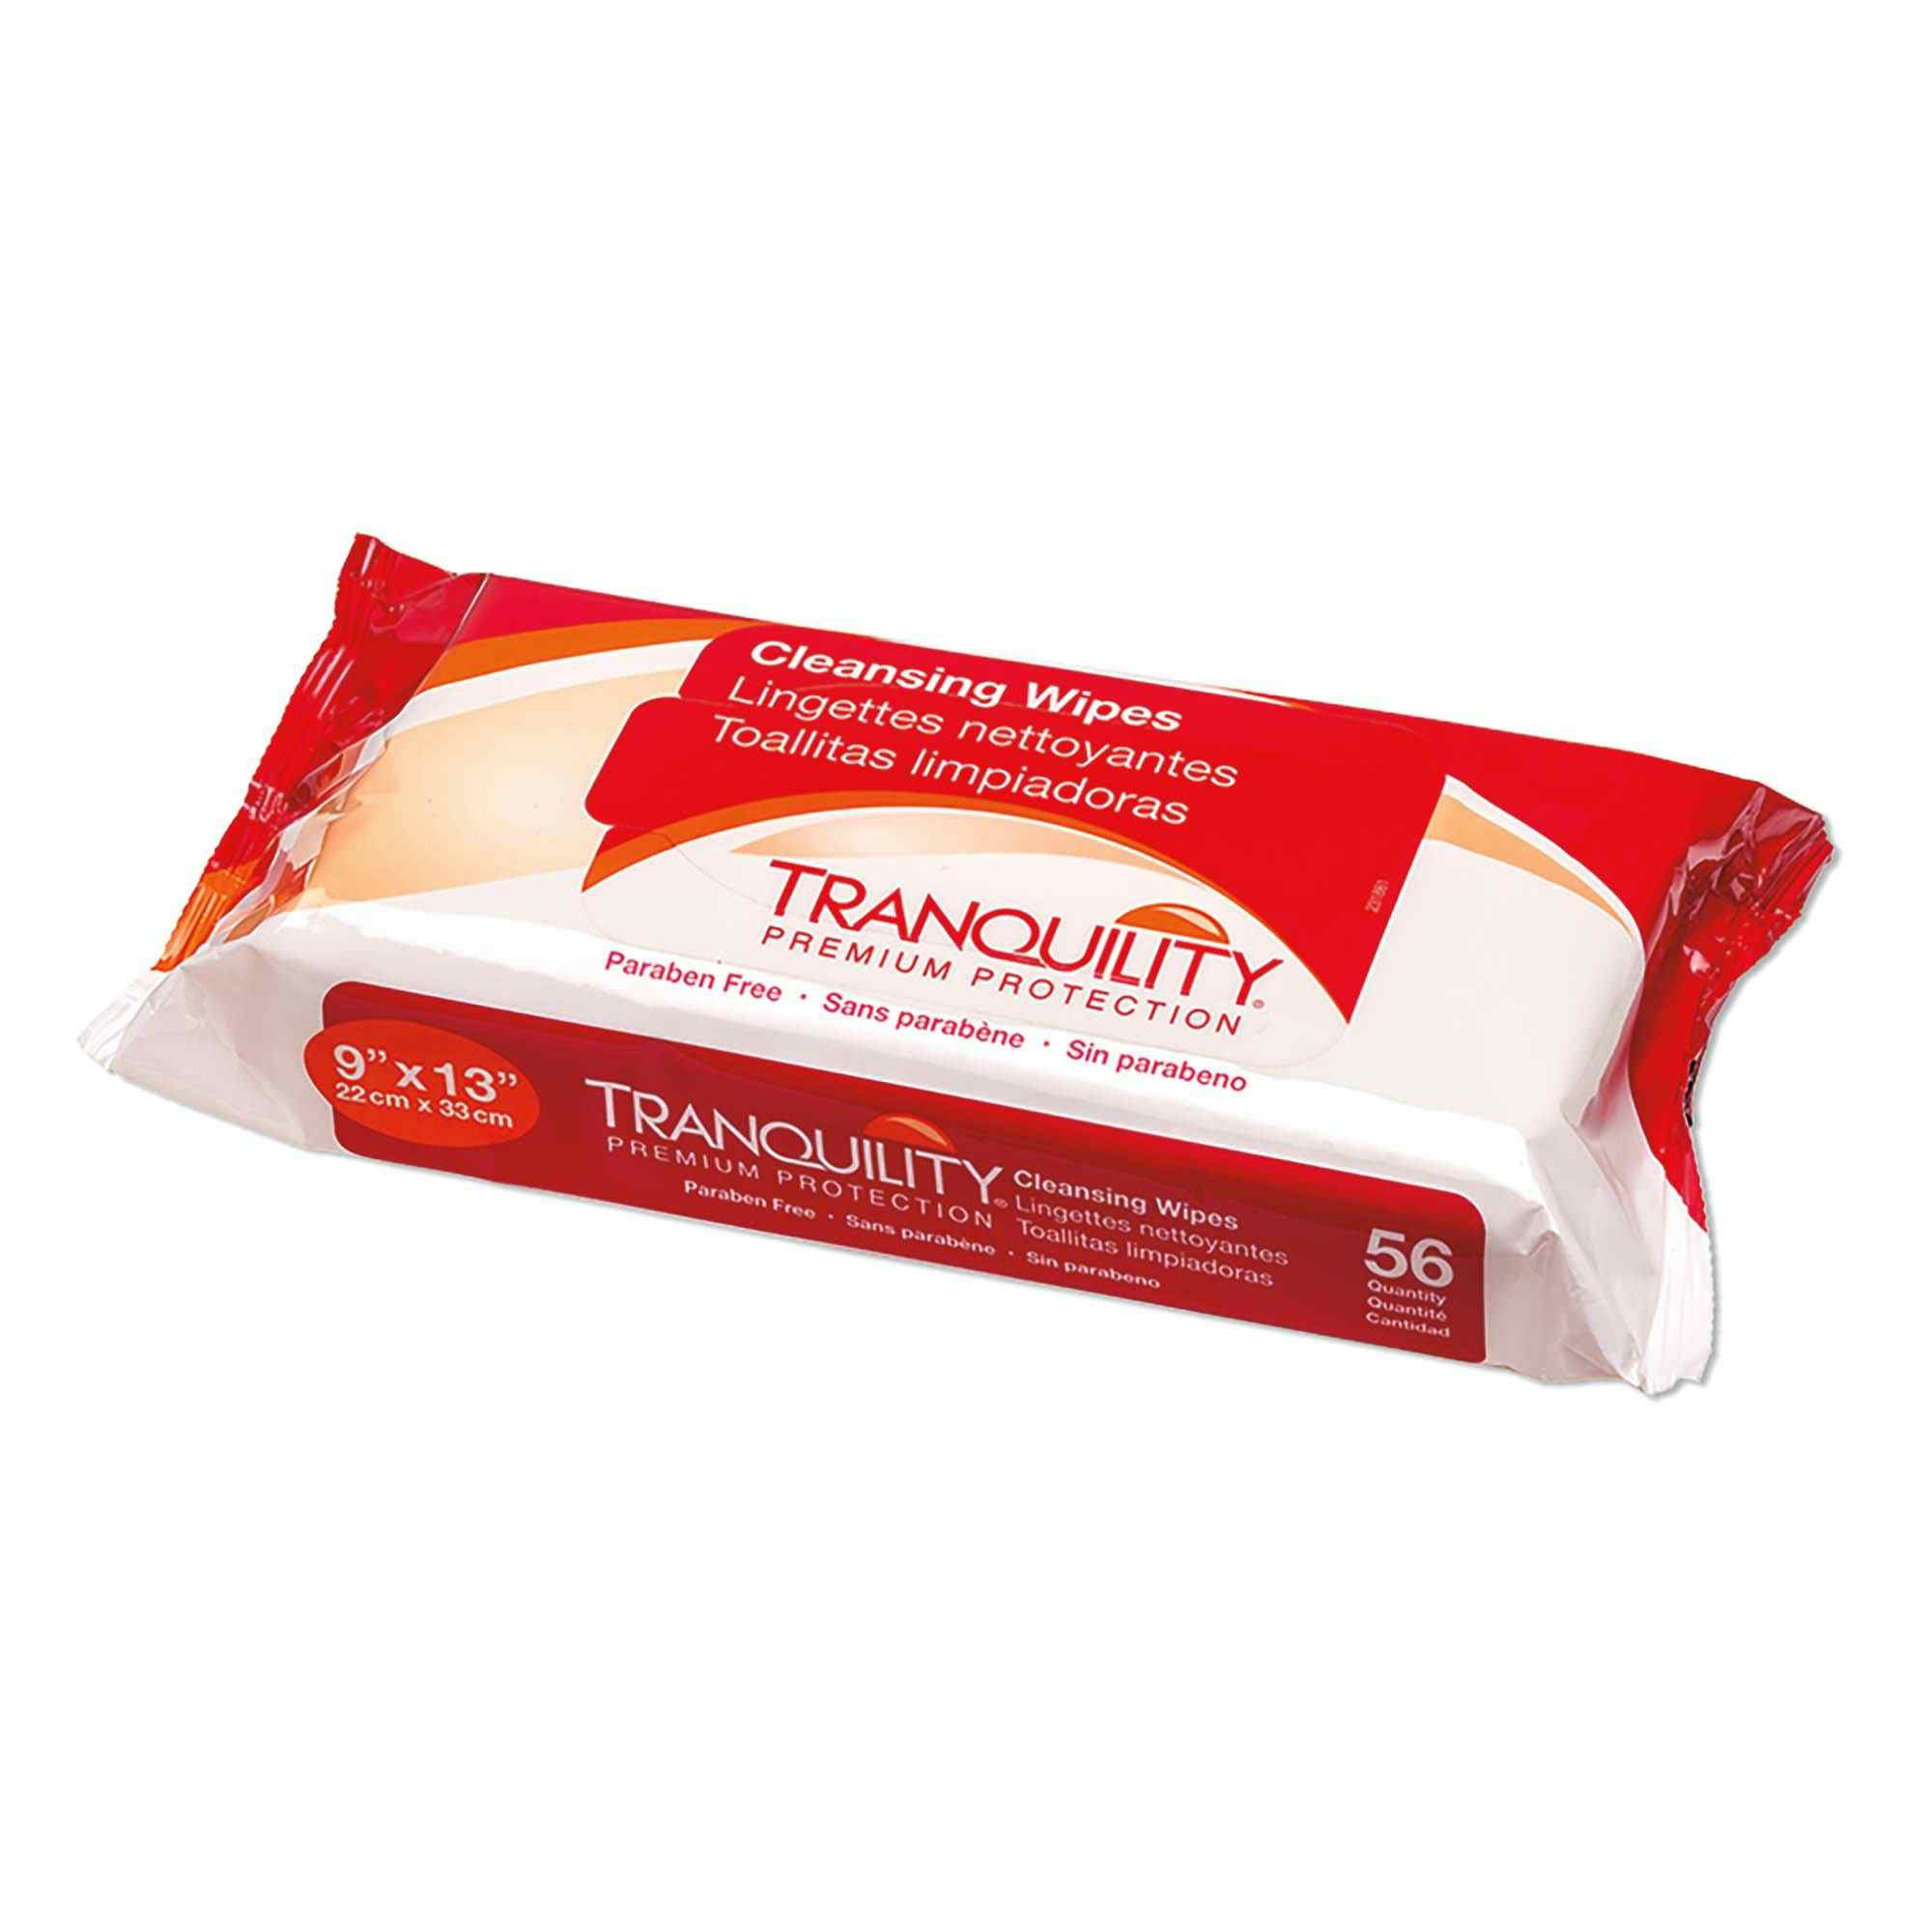 Tranquility Cleansing Wipes, Lightly Scented